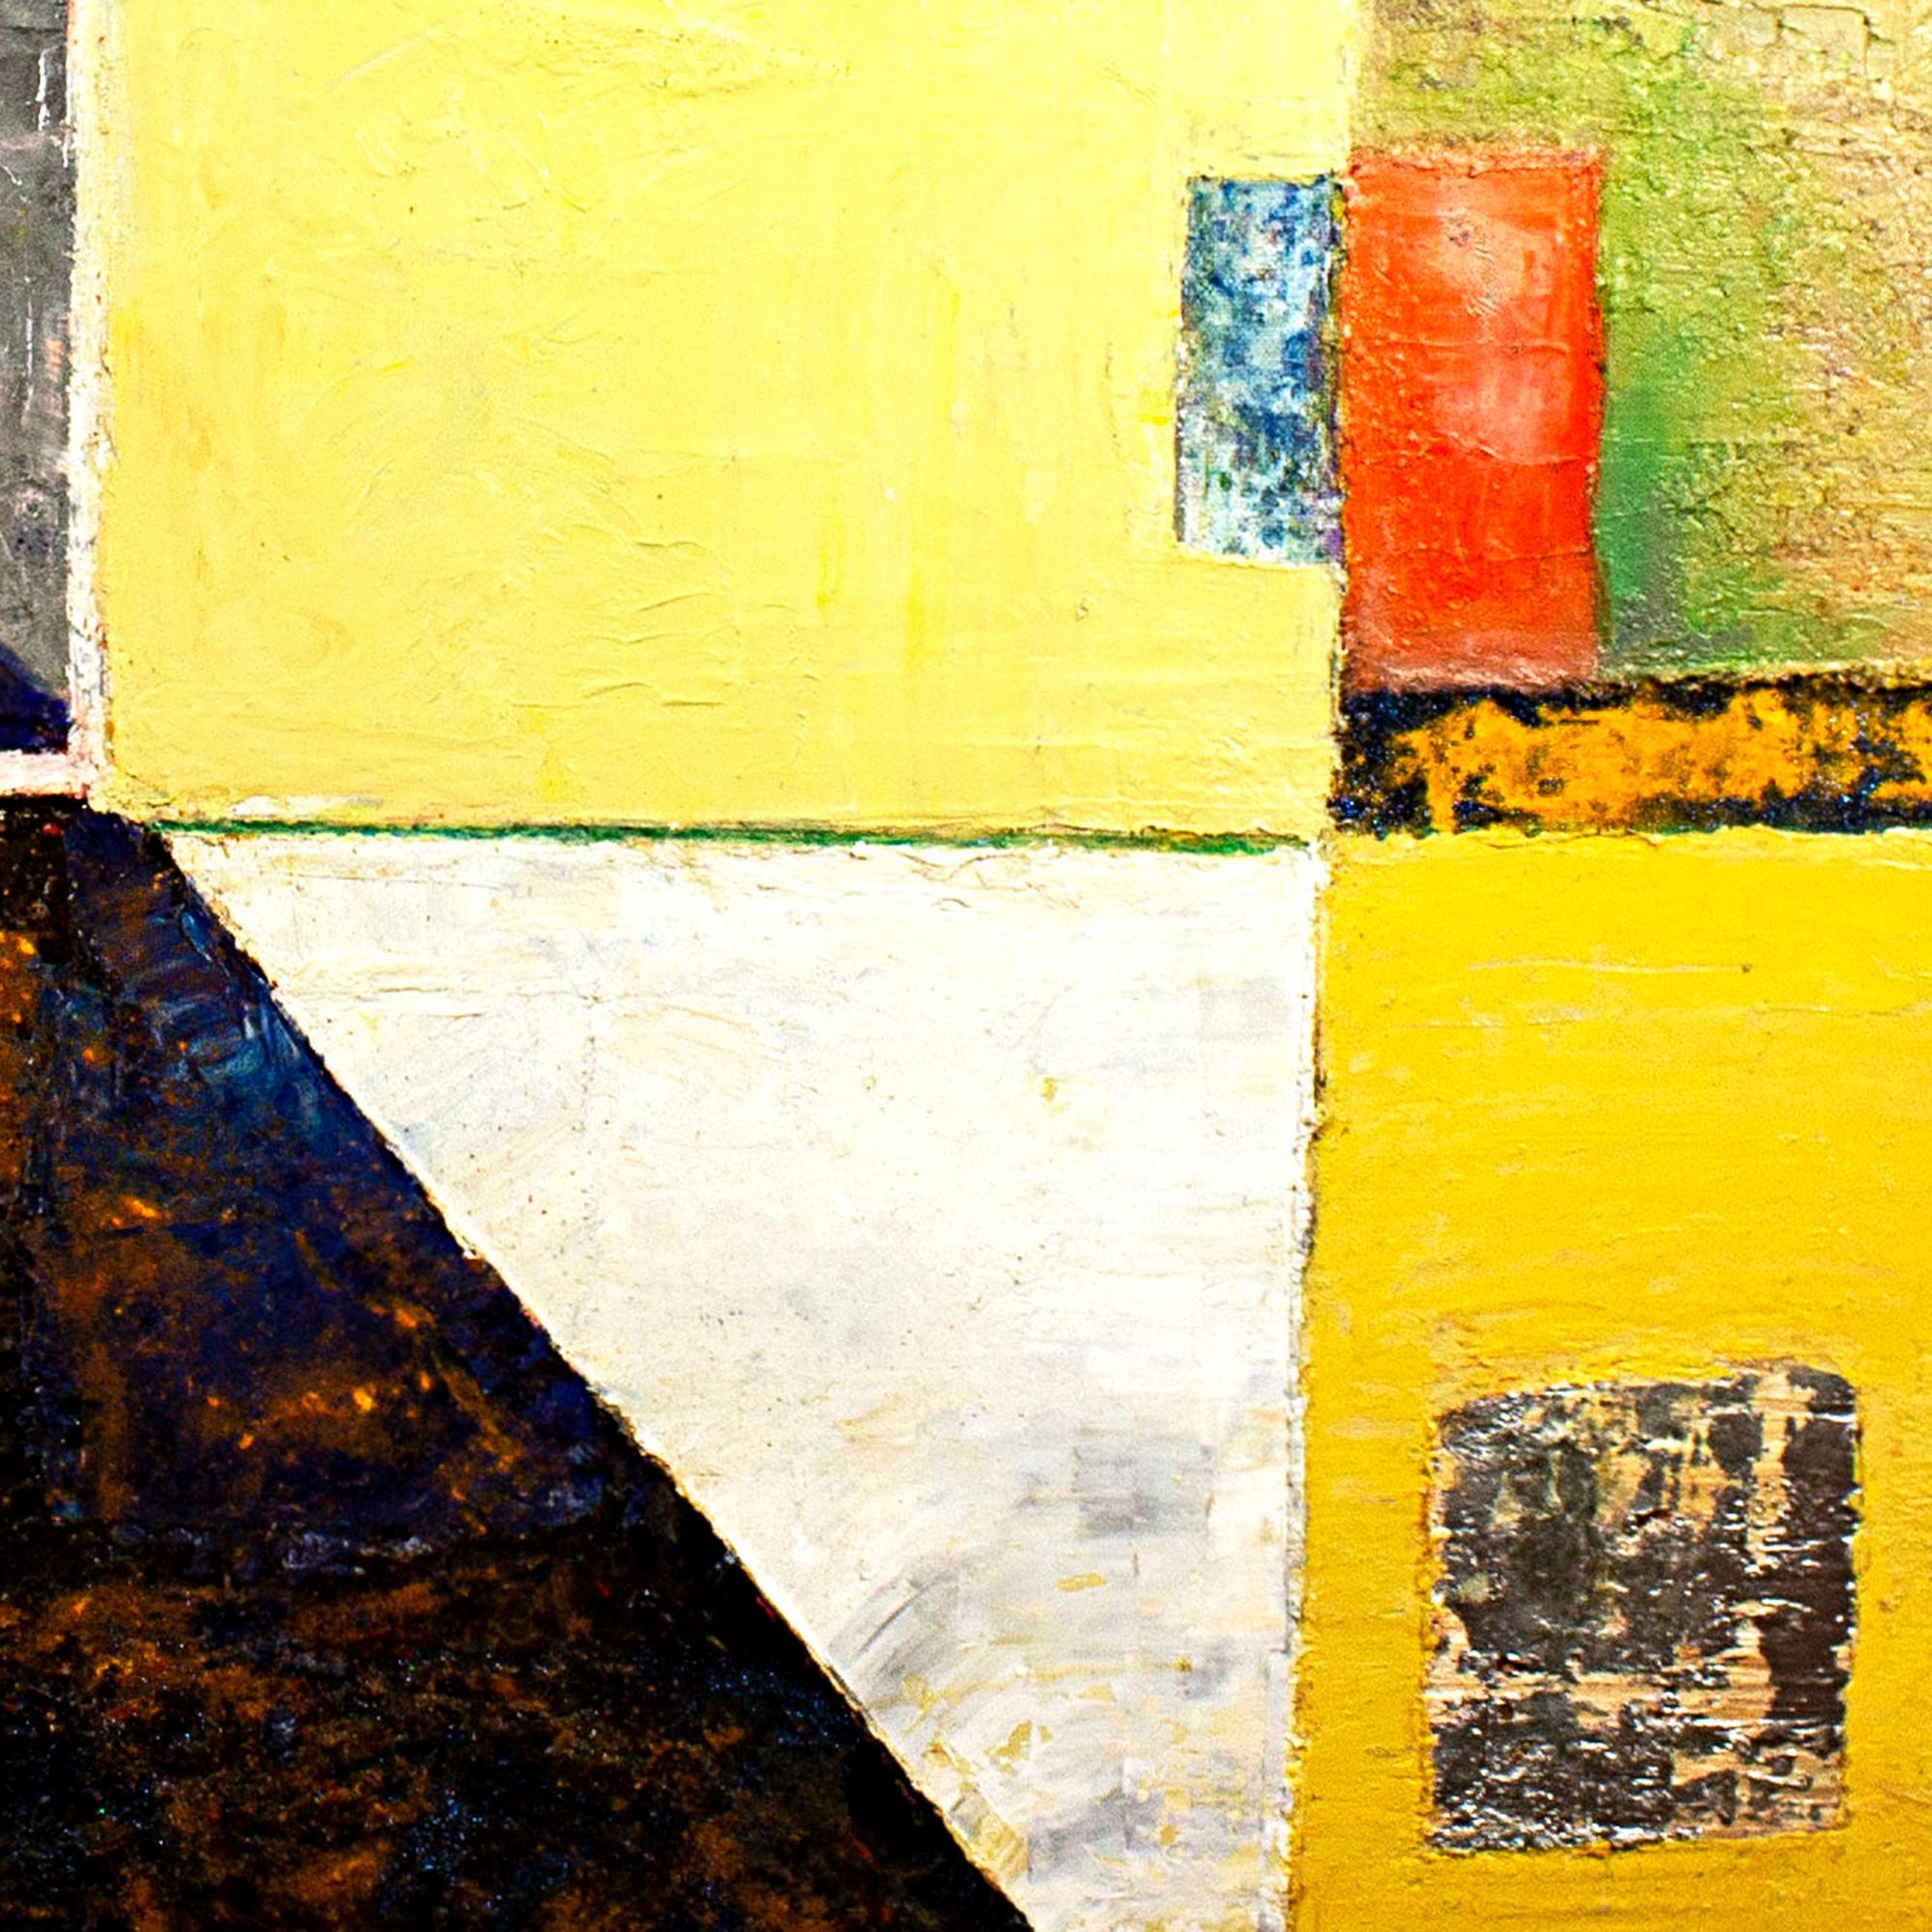 Other Dimensions - Abstract Geometric Painting by Doug Frohman